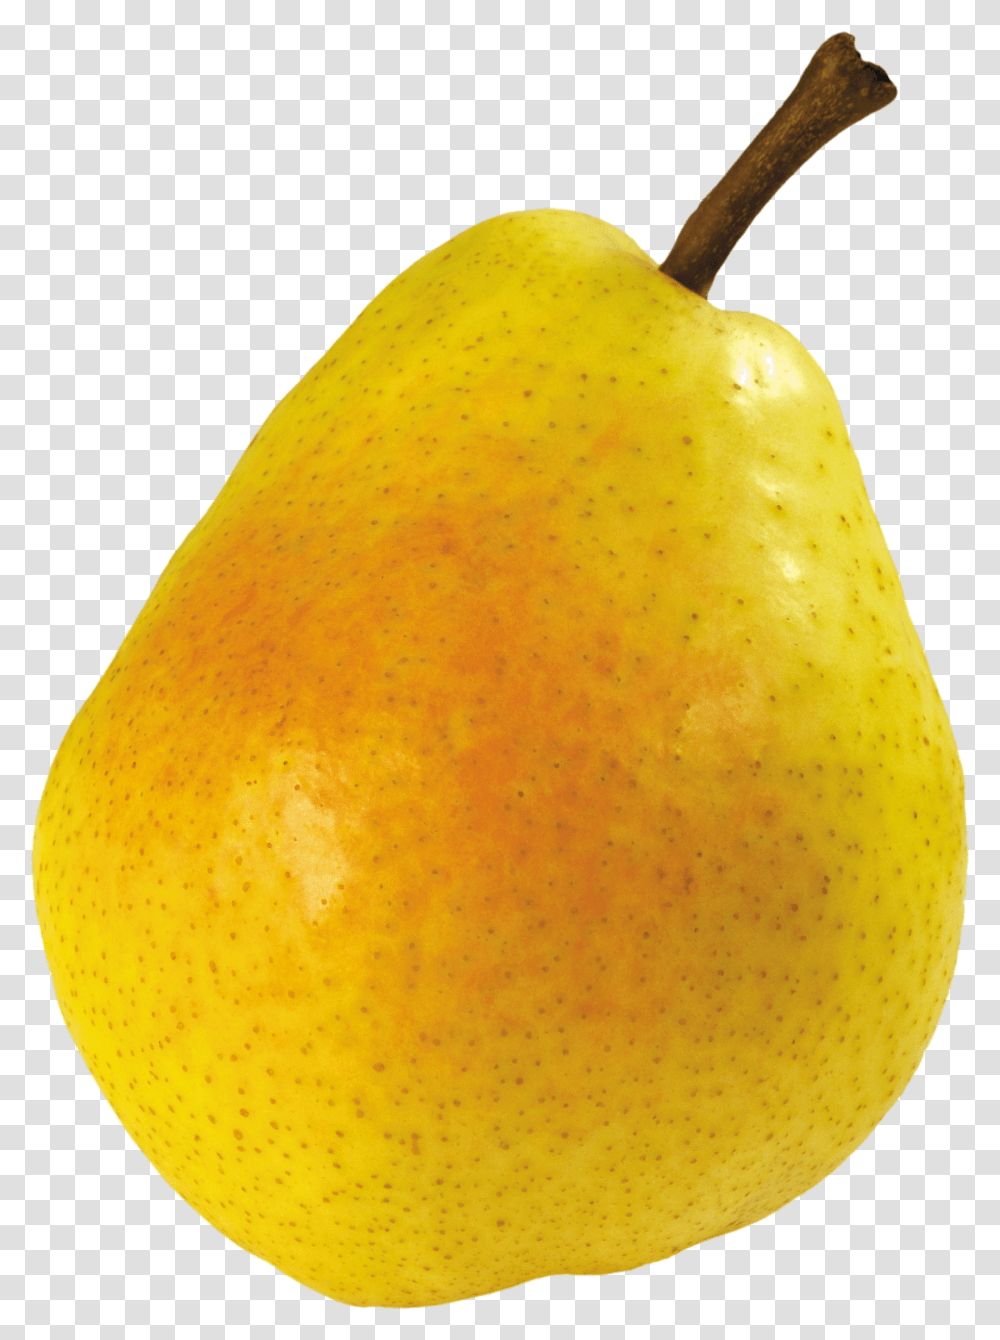 Pear Background Transparent Png